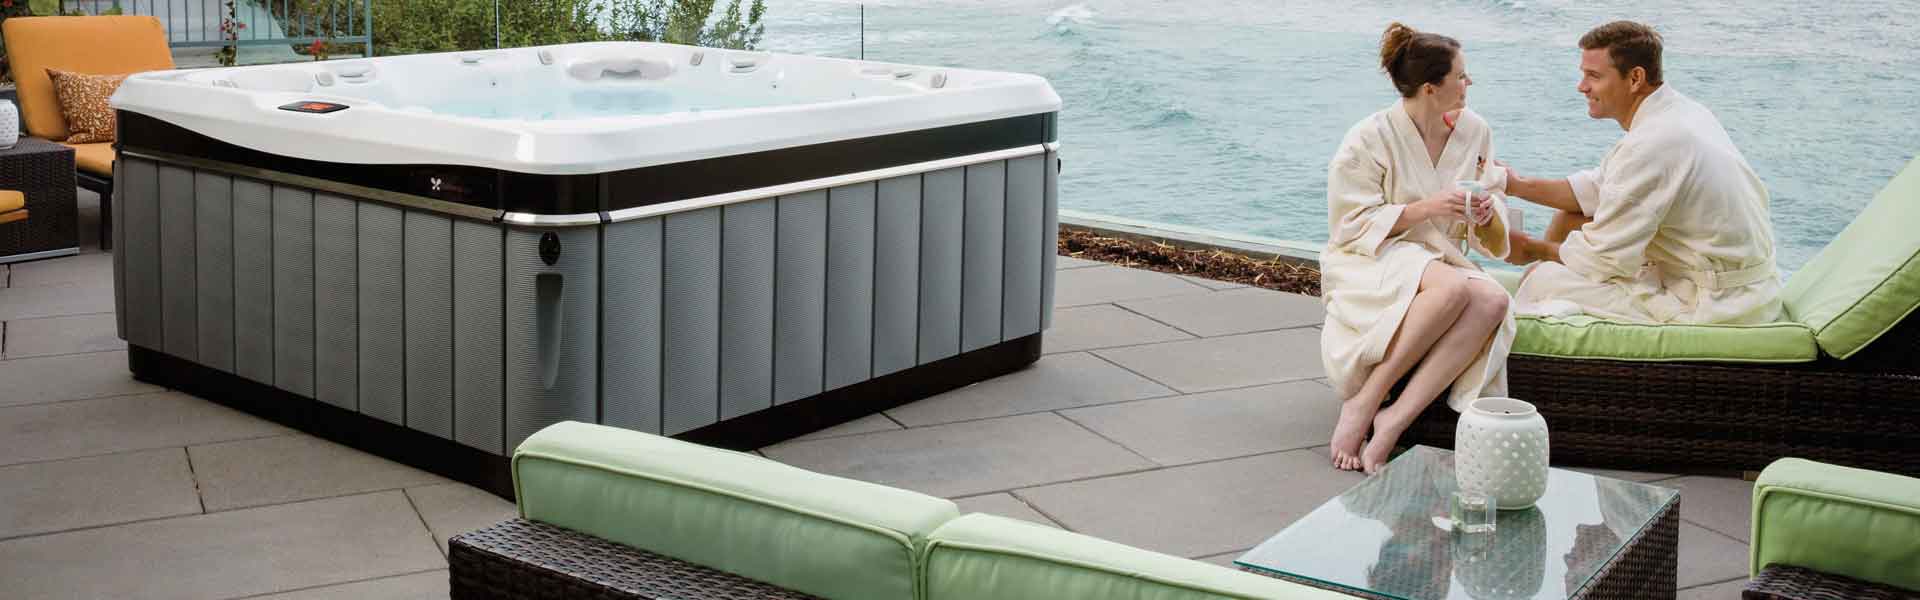 The Top Environmentally Friendly Hot Tubs Reduce Water Usage